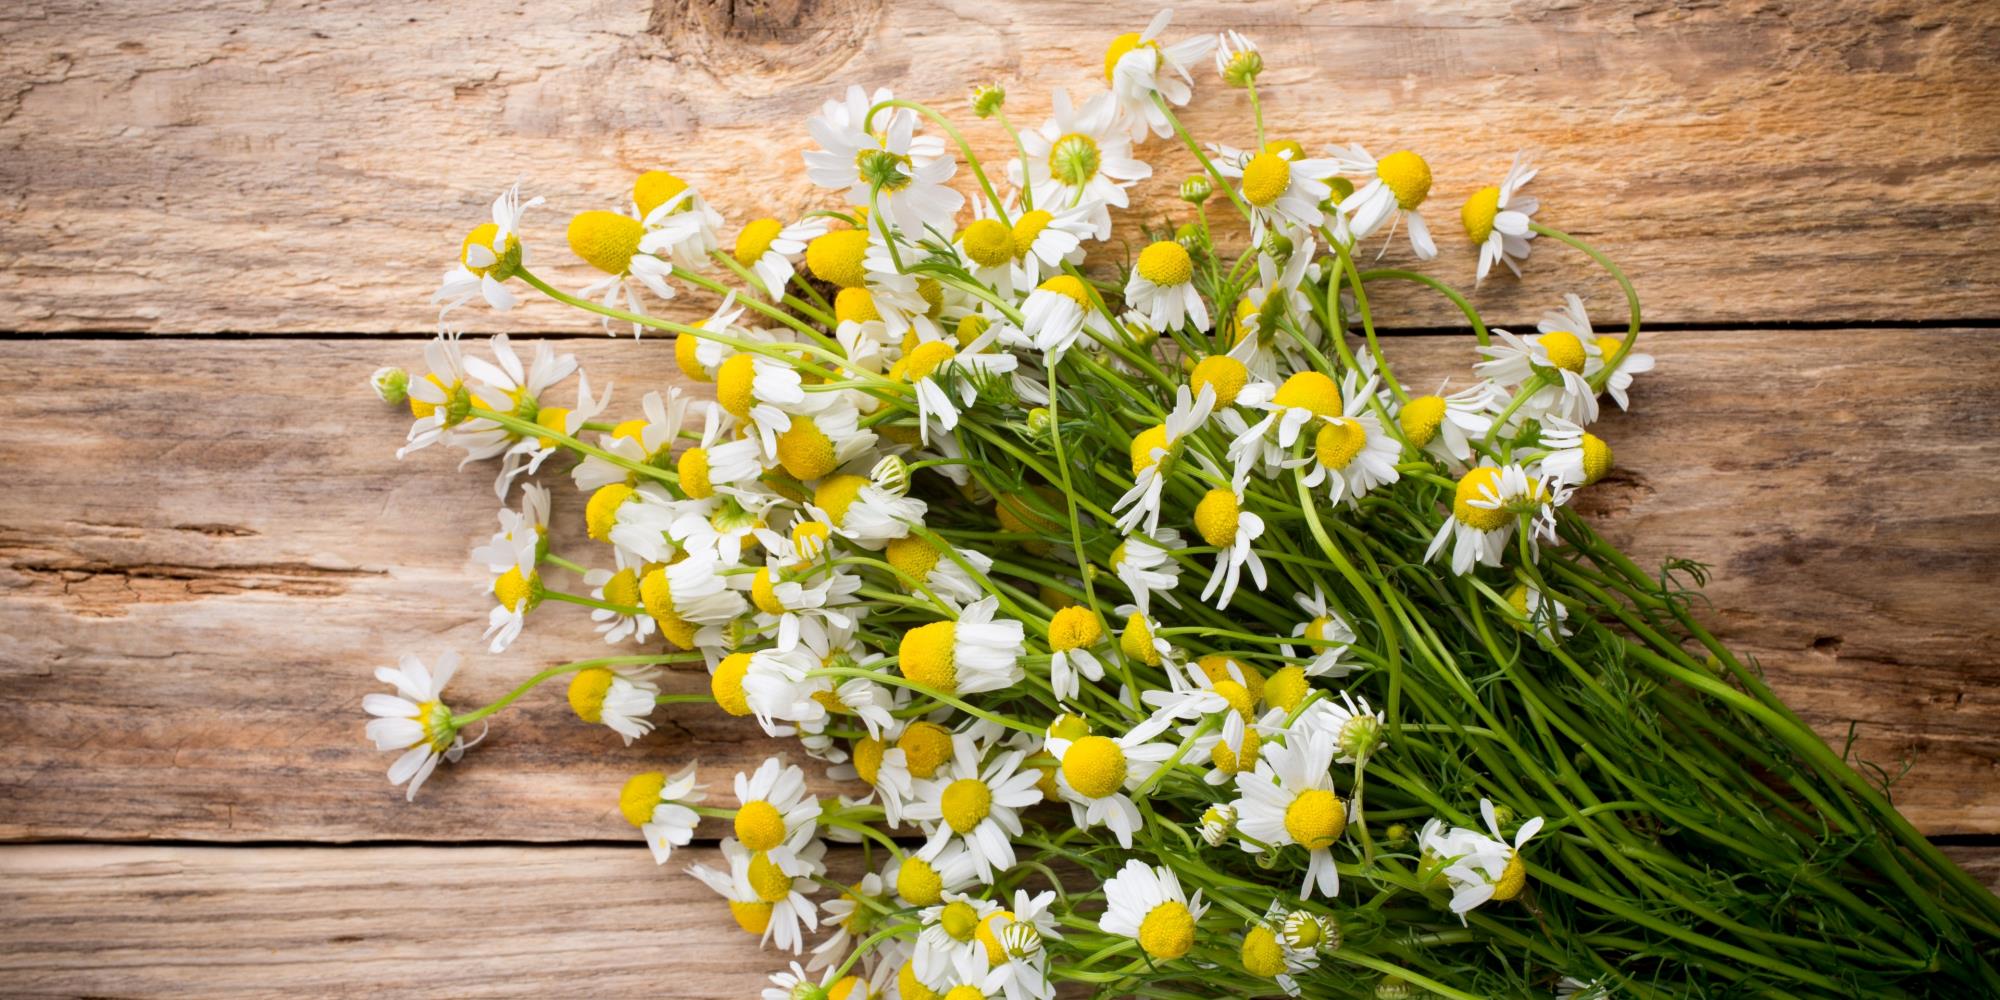 Comparing the effectiveness of chamomile and valerian for sleep and anxiety